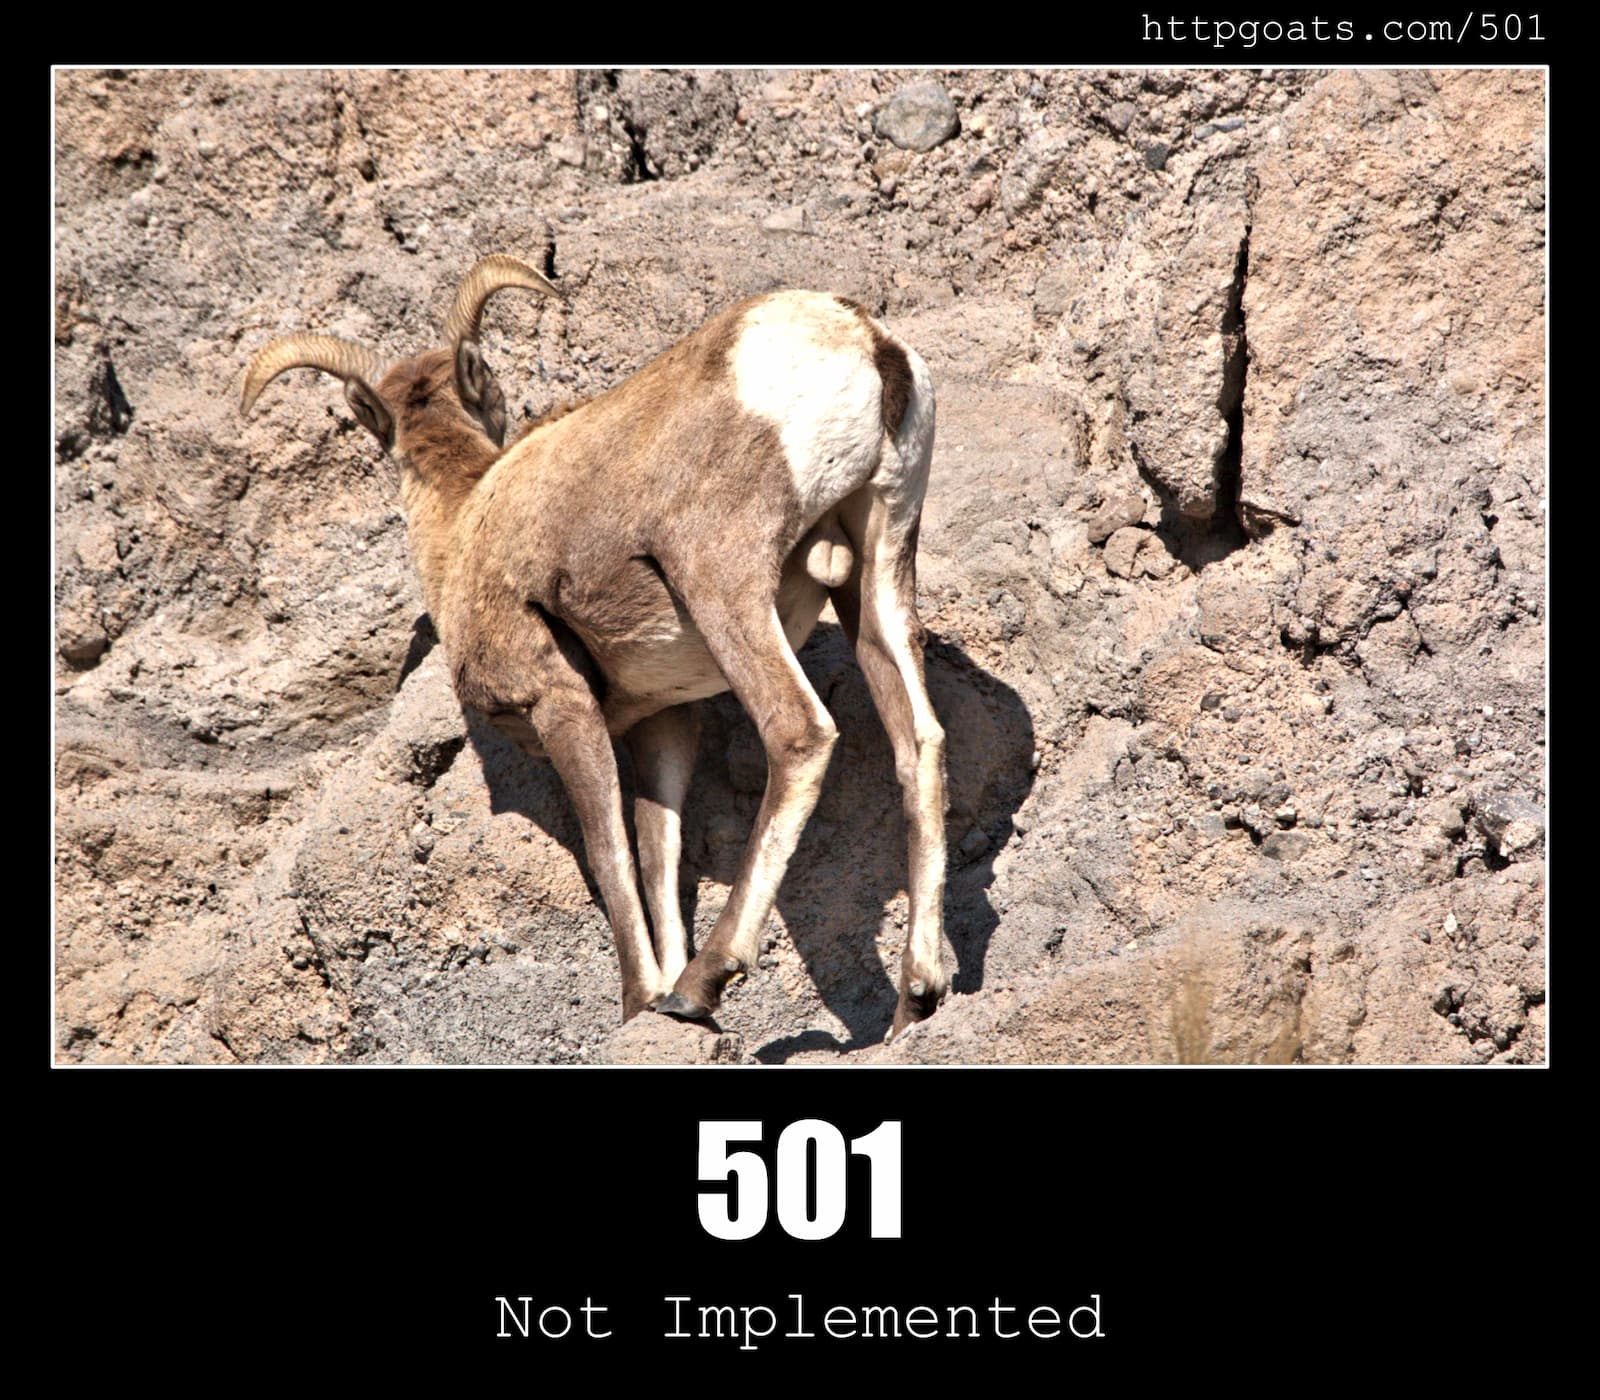 HTTP Status Code 501 Not Implemented & Goats